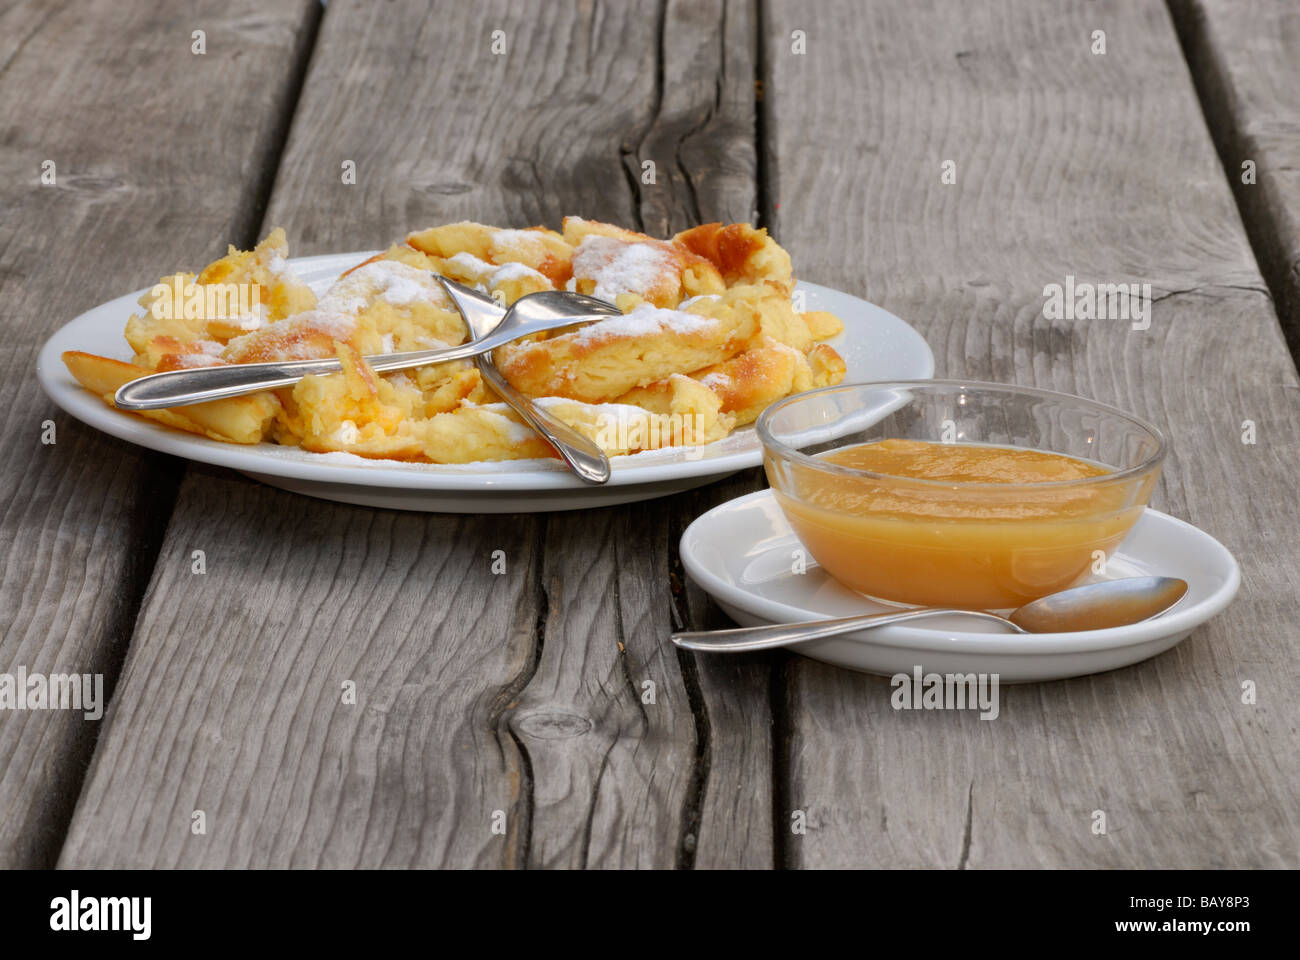 one portion of cut-up and sugared pancake with apple sauce on wooden table, alpine hut Sulzenaualm, Sulzaualm, Stubaier Alpen ra Stock Photo